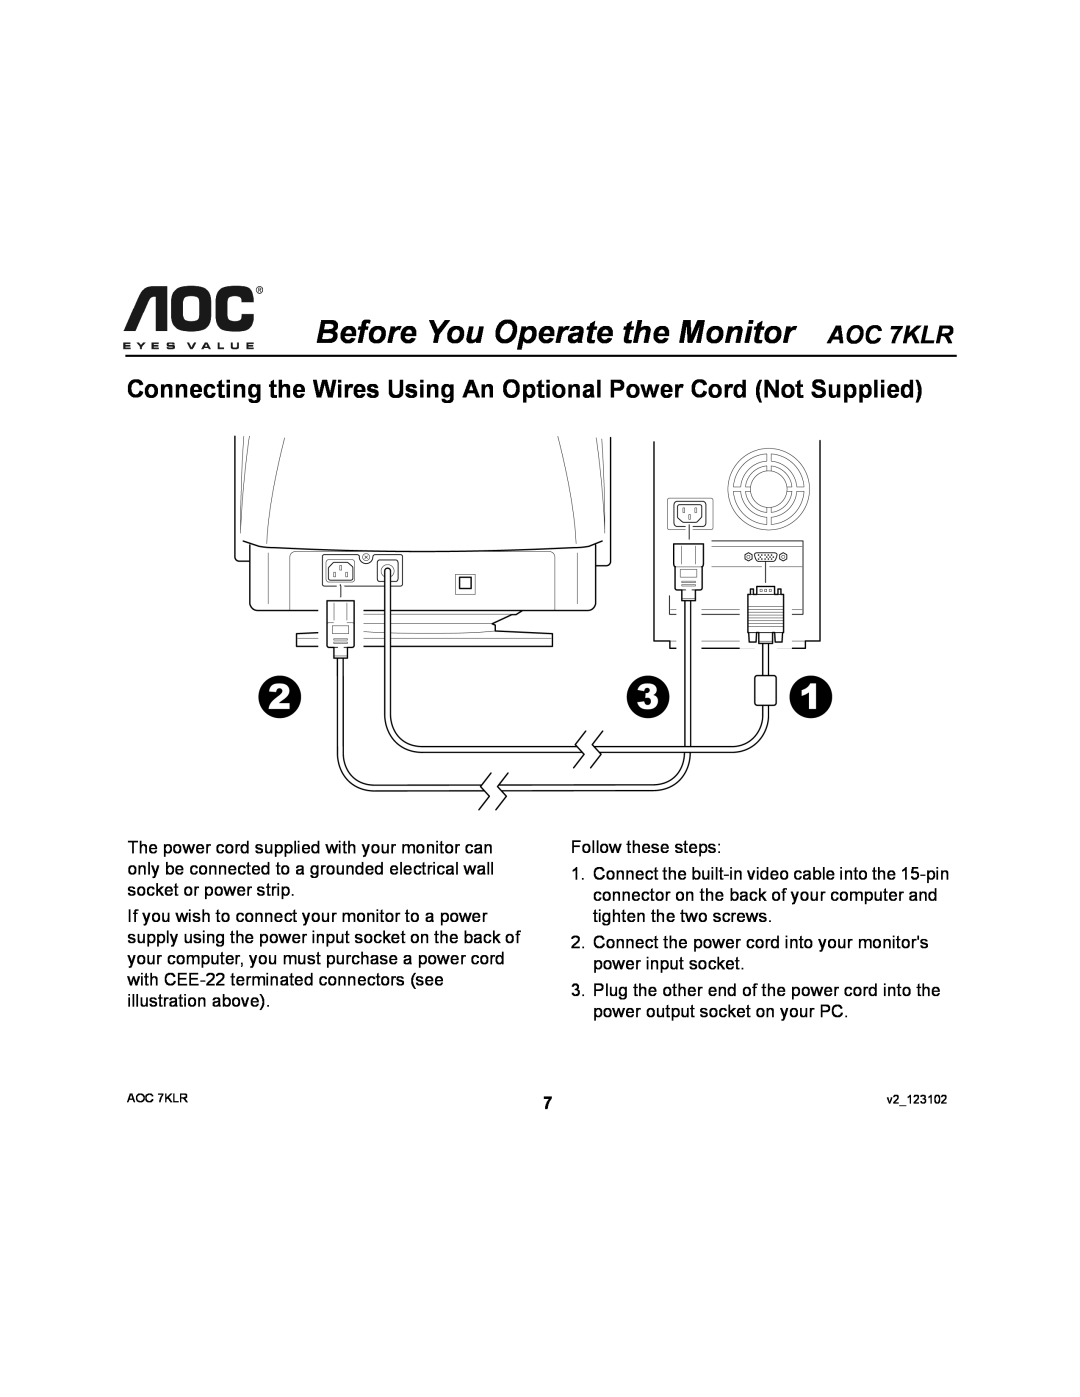 AOC user manual Connecting the Wires Using An Optional Power Cord Not Supplied, Before You Operate the Monitor AOC 7KLR 